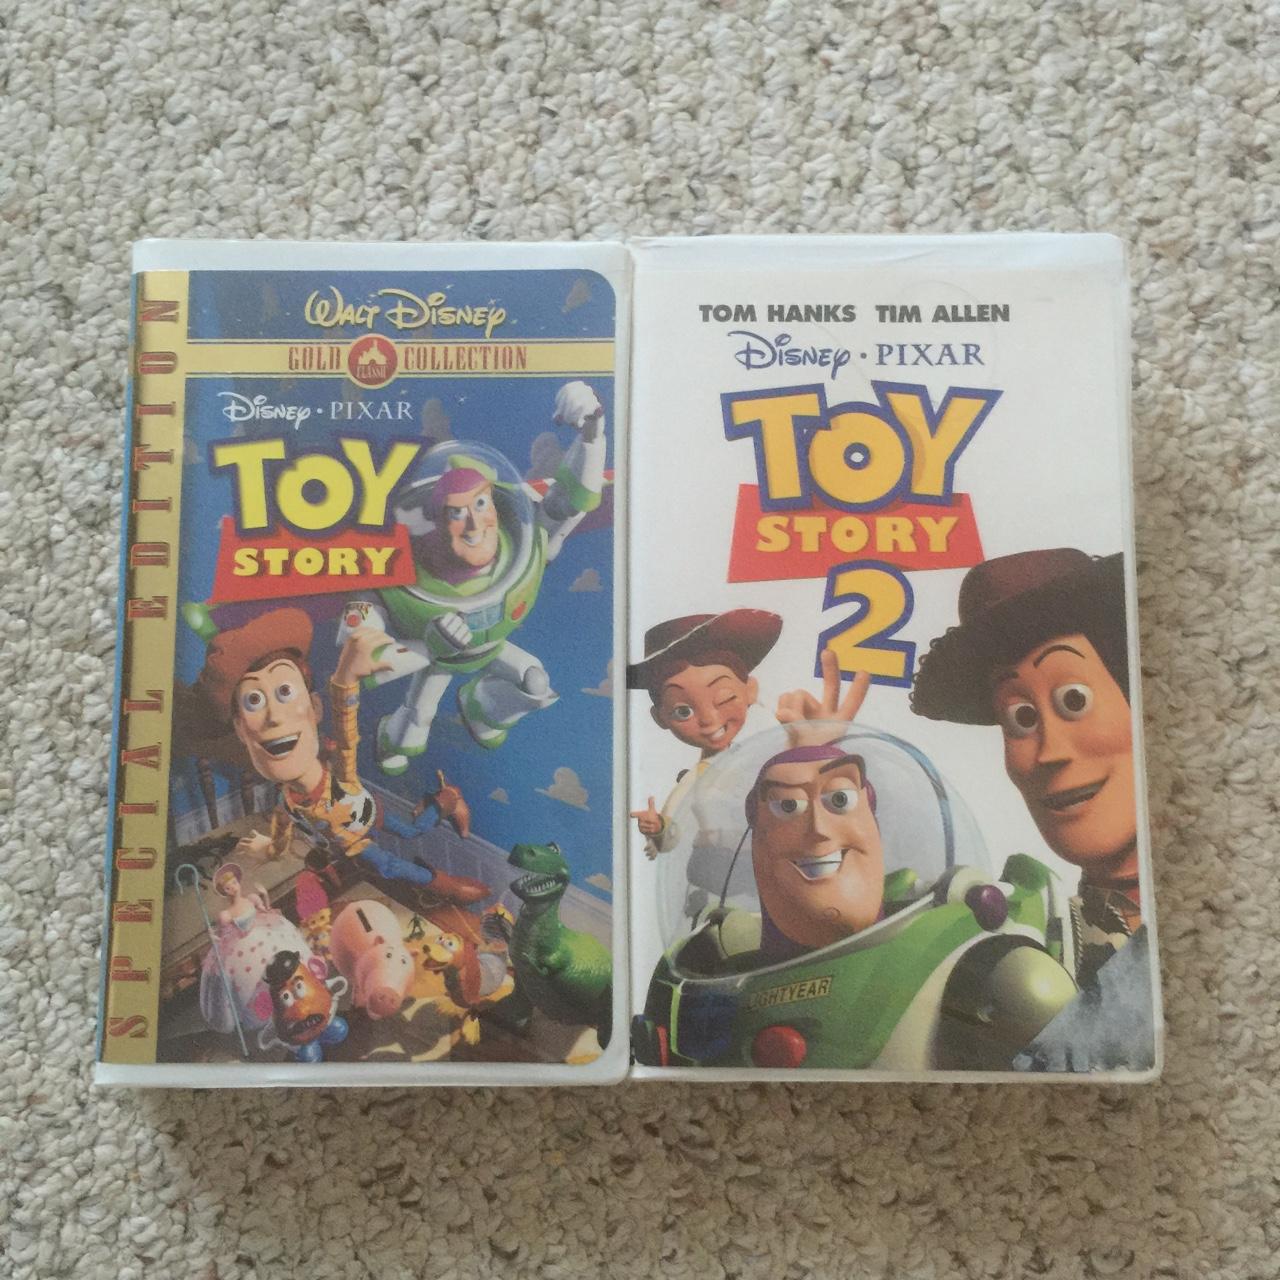 toy story 2 vhs